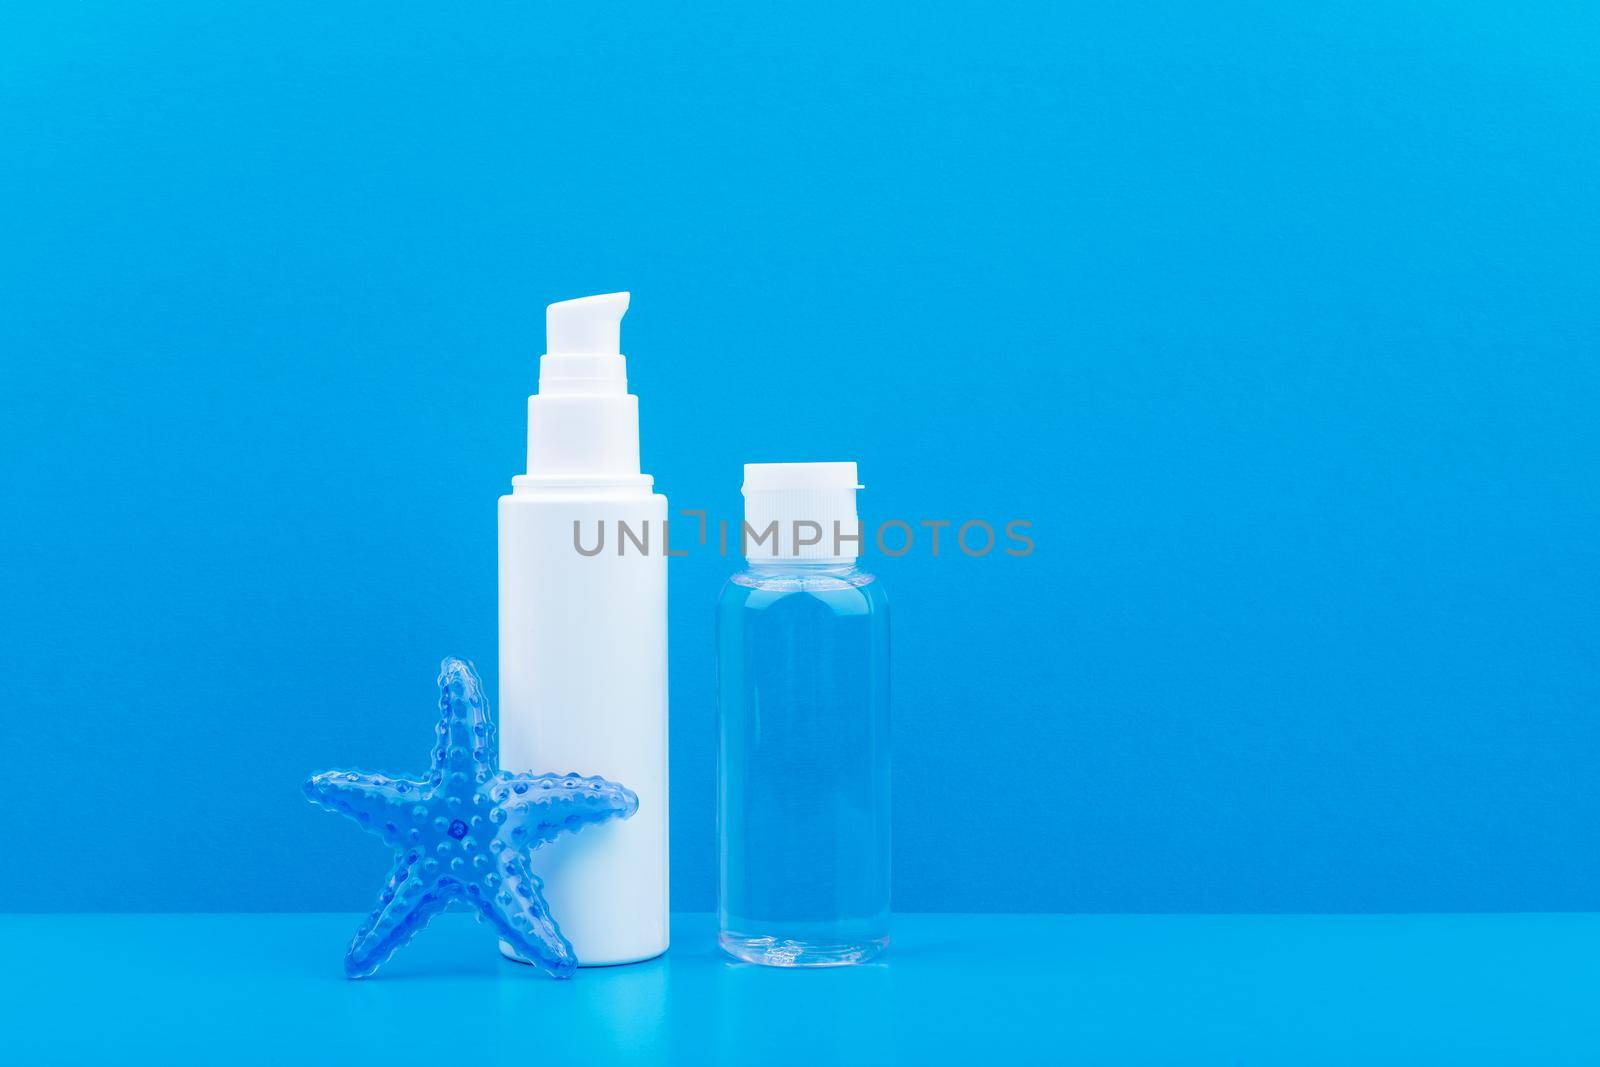 Face cream or scrub and skin lotion with star fish against blue background with copy space. Concept of natural cosmetics with sea salt or tangle extract